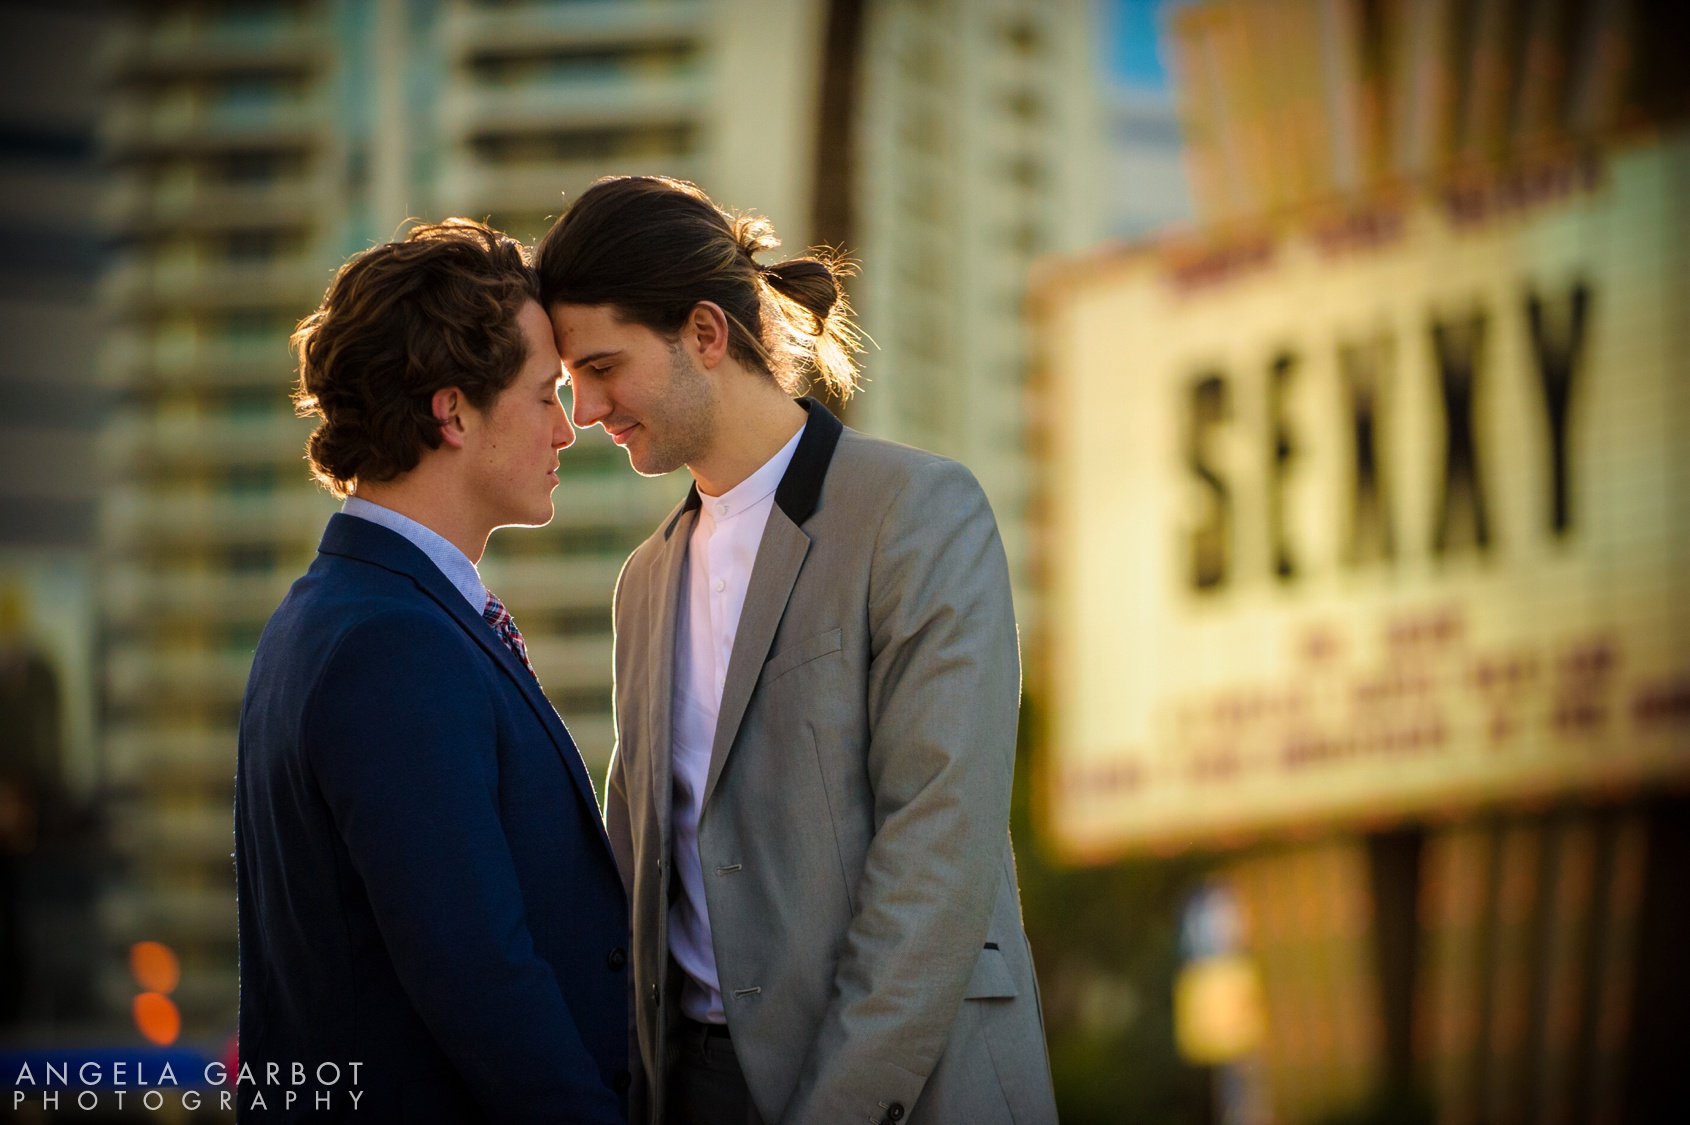 Las Vegas Pre-wedding and engagement session photo with same sex couple.